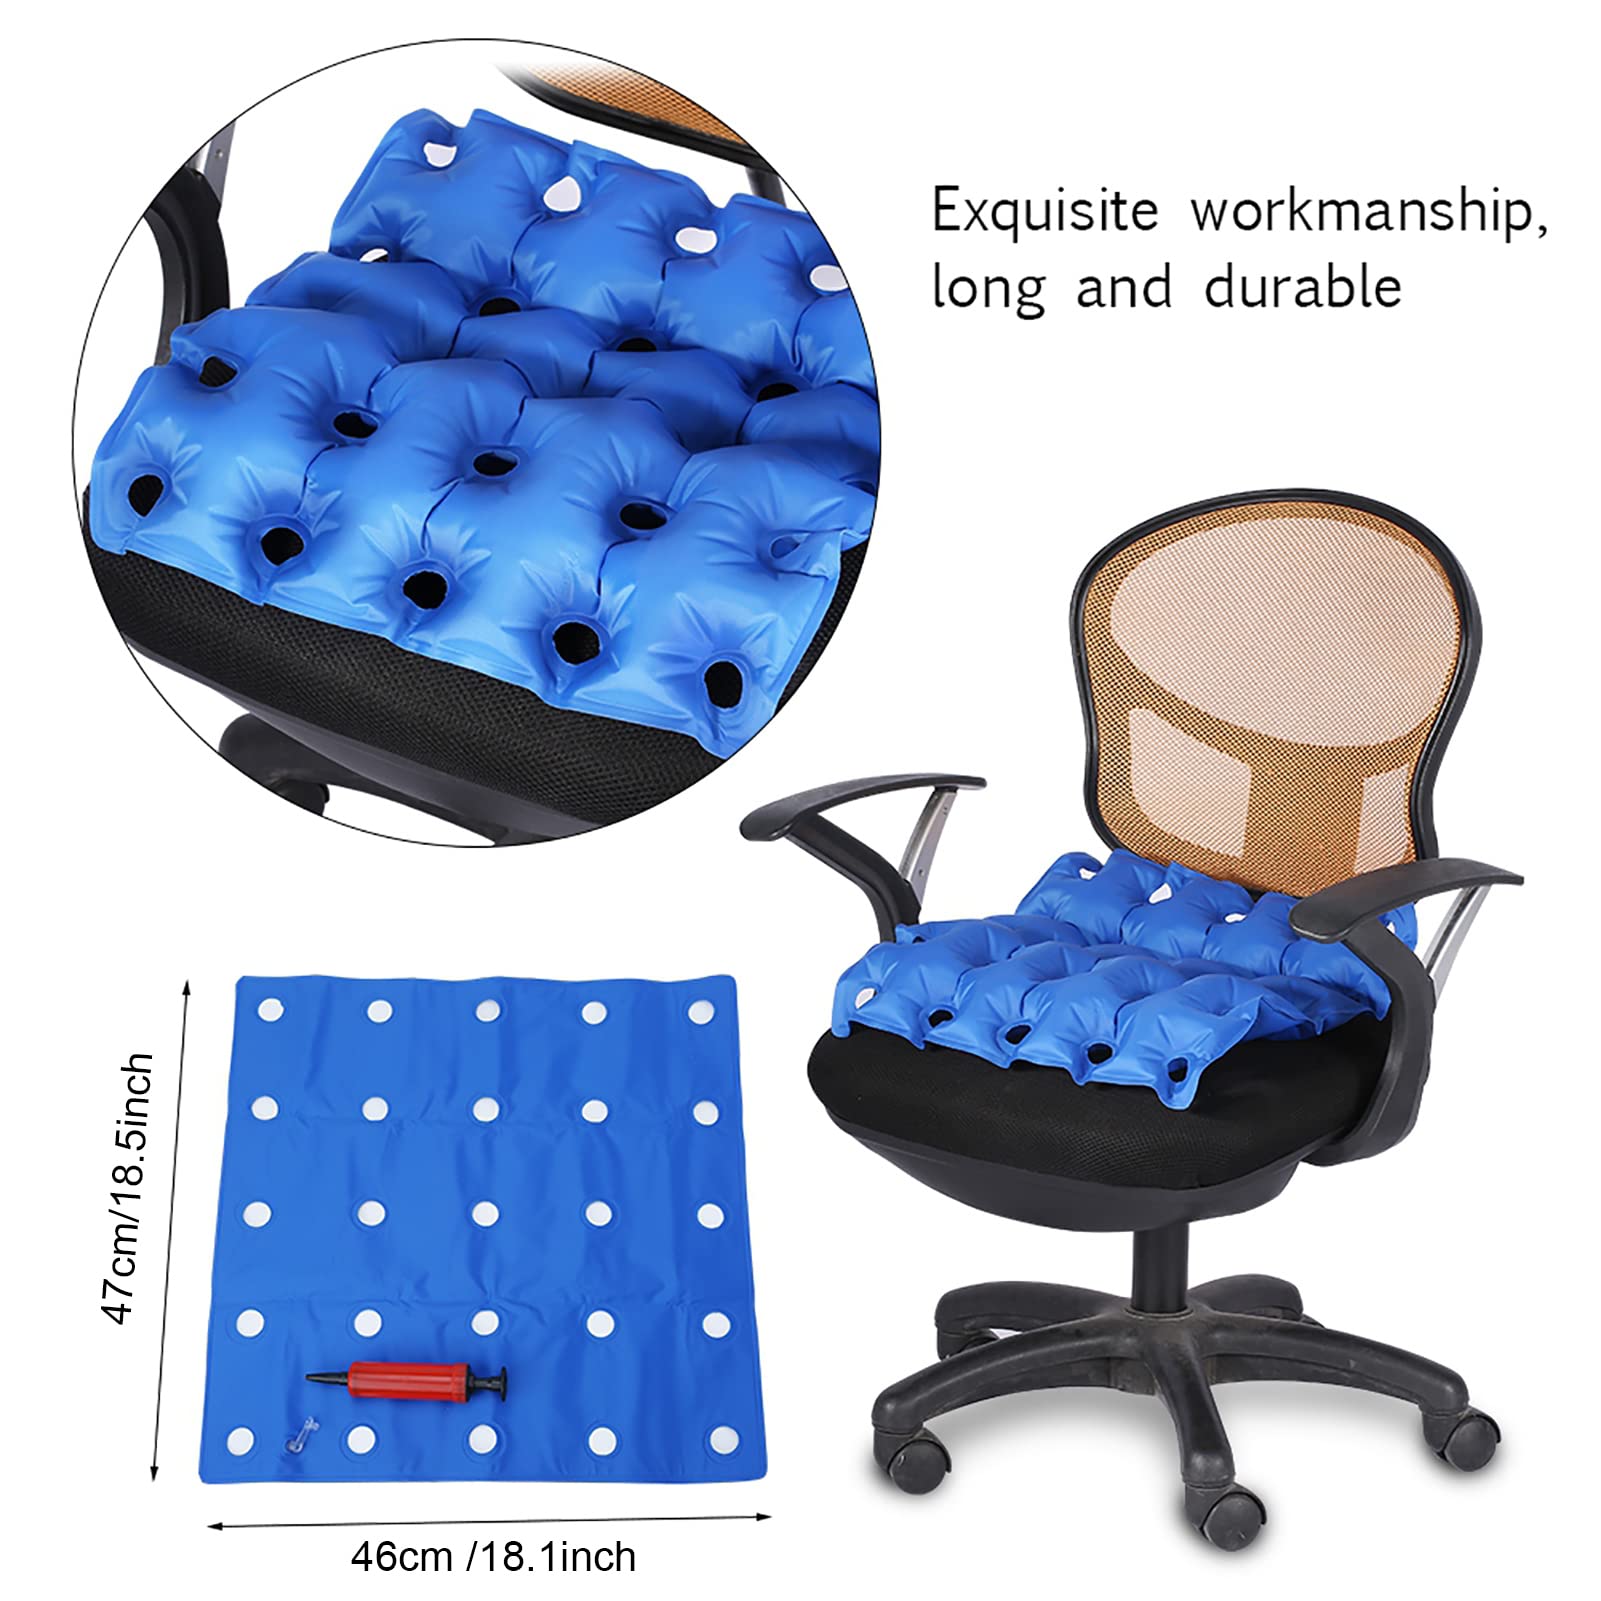 Yosoo Health Gear Inflatable Chair Pad, 25 Holes Inflatable Seat Cushion Air Filled Chair Cushion Anti Bedsore Decubitus Chair Pad Mat with Inflatable Pump for Wheel Chair and Daily Use